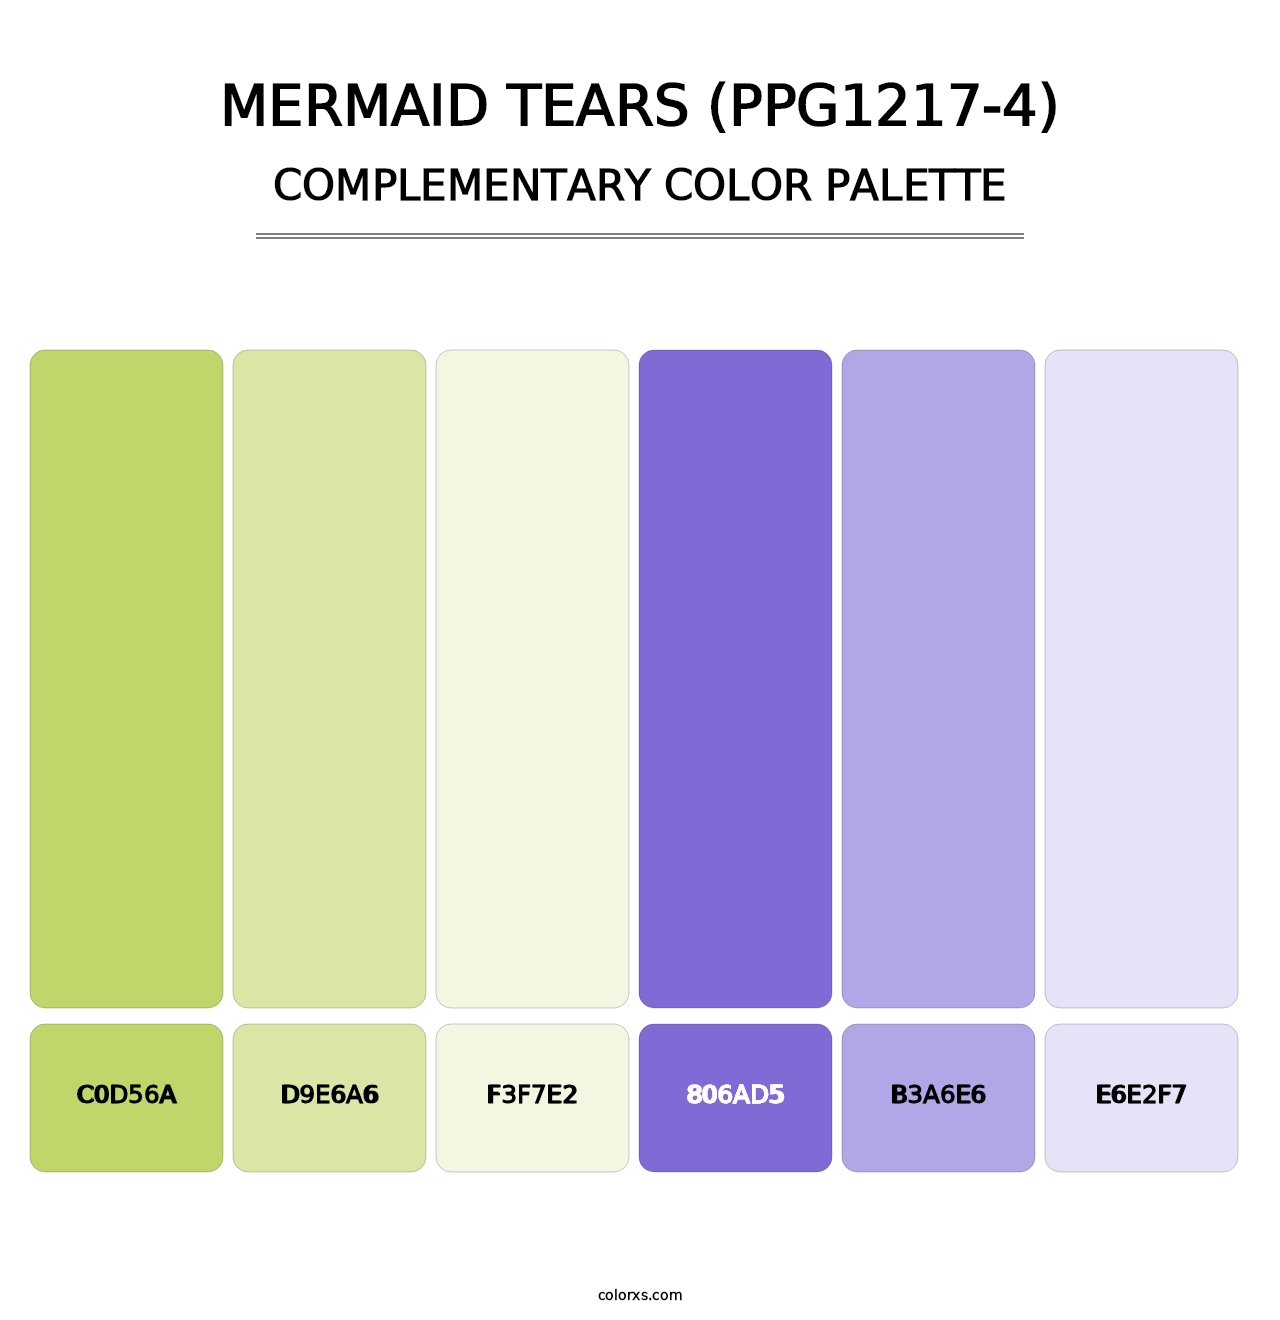 Mermaid Tears (PPG1217-4) - Complementary Color Palette